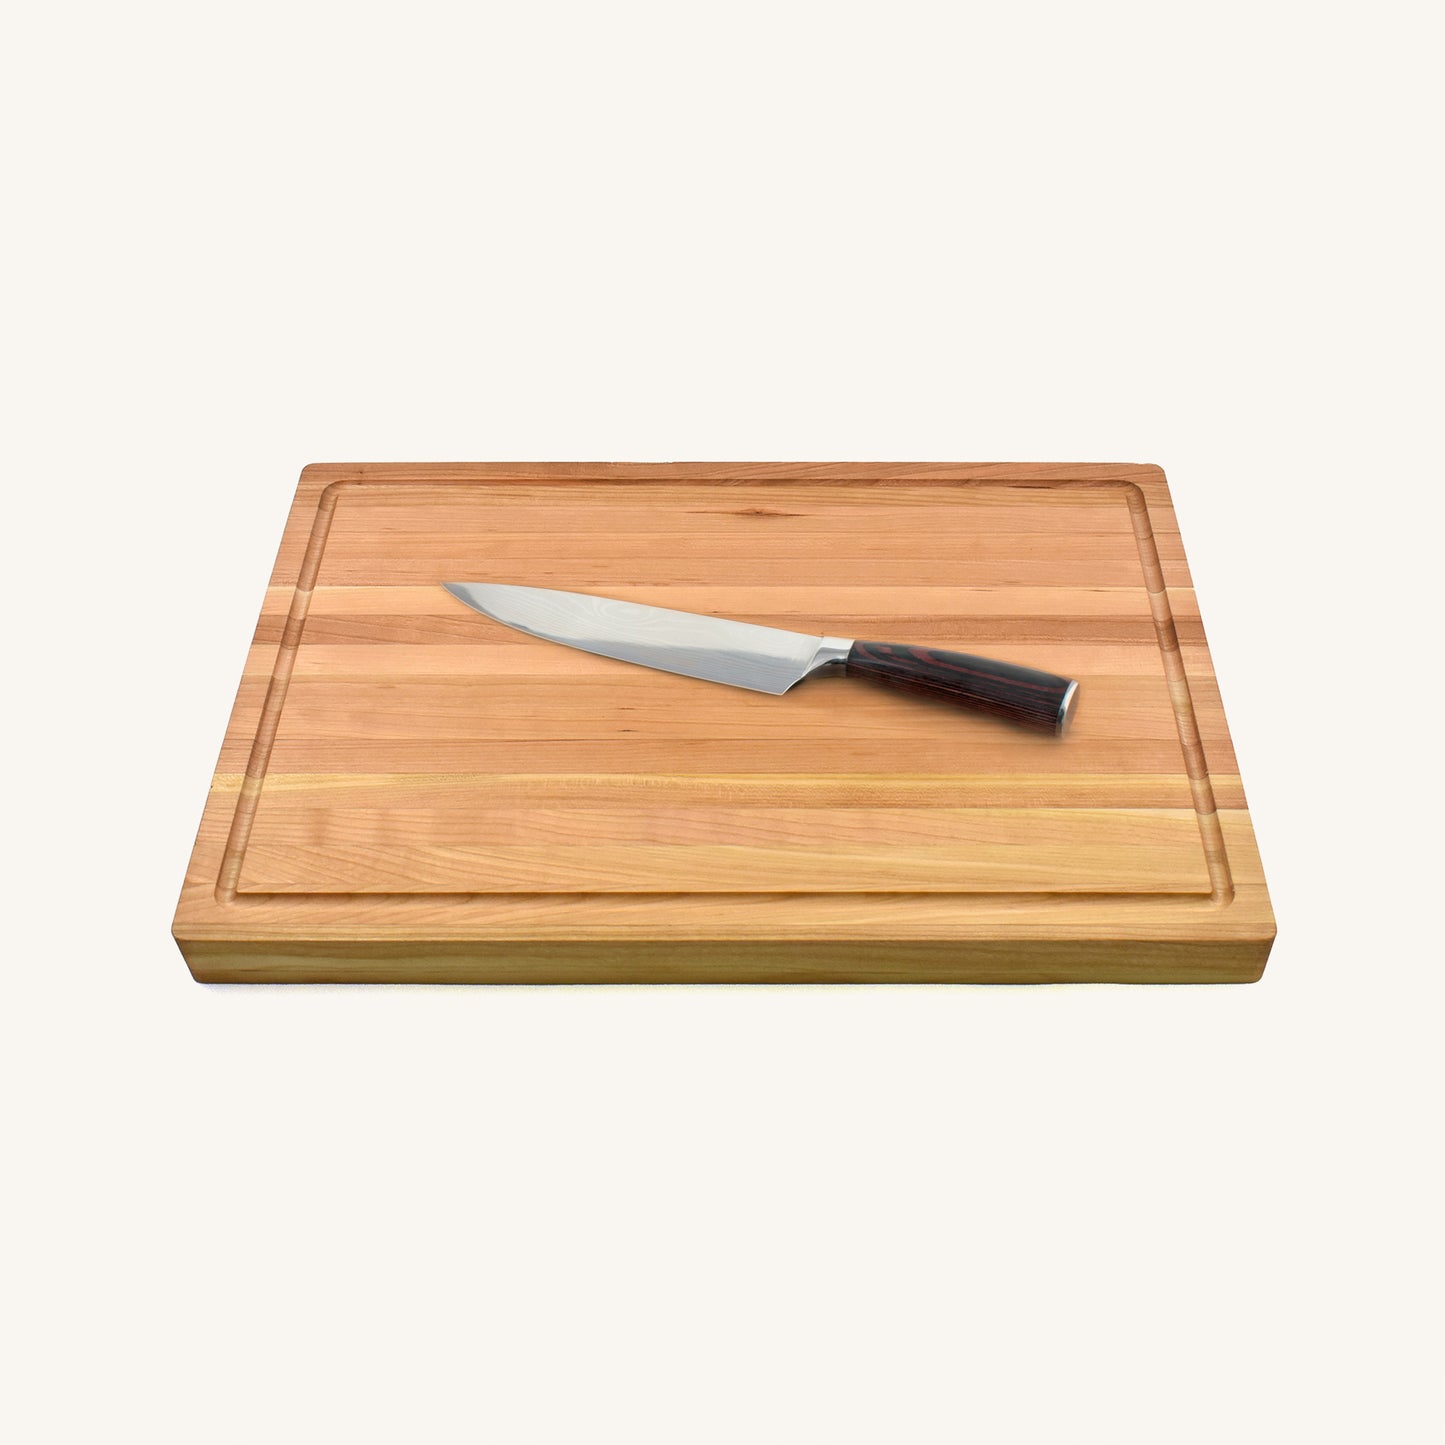 Bundle of Butcher Block Board with Chef Knife